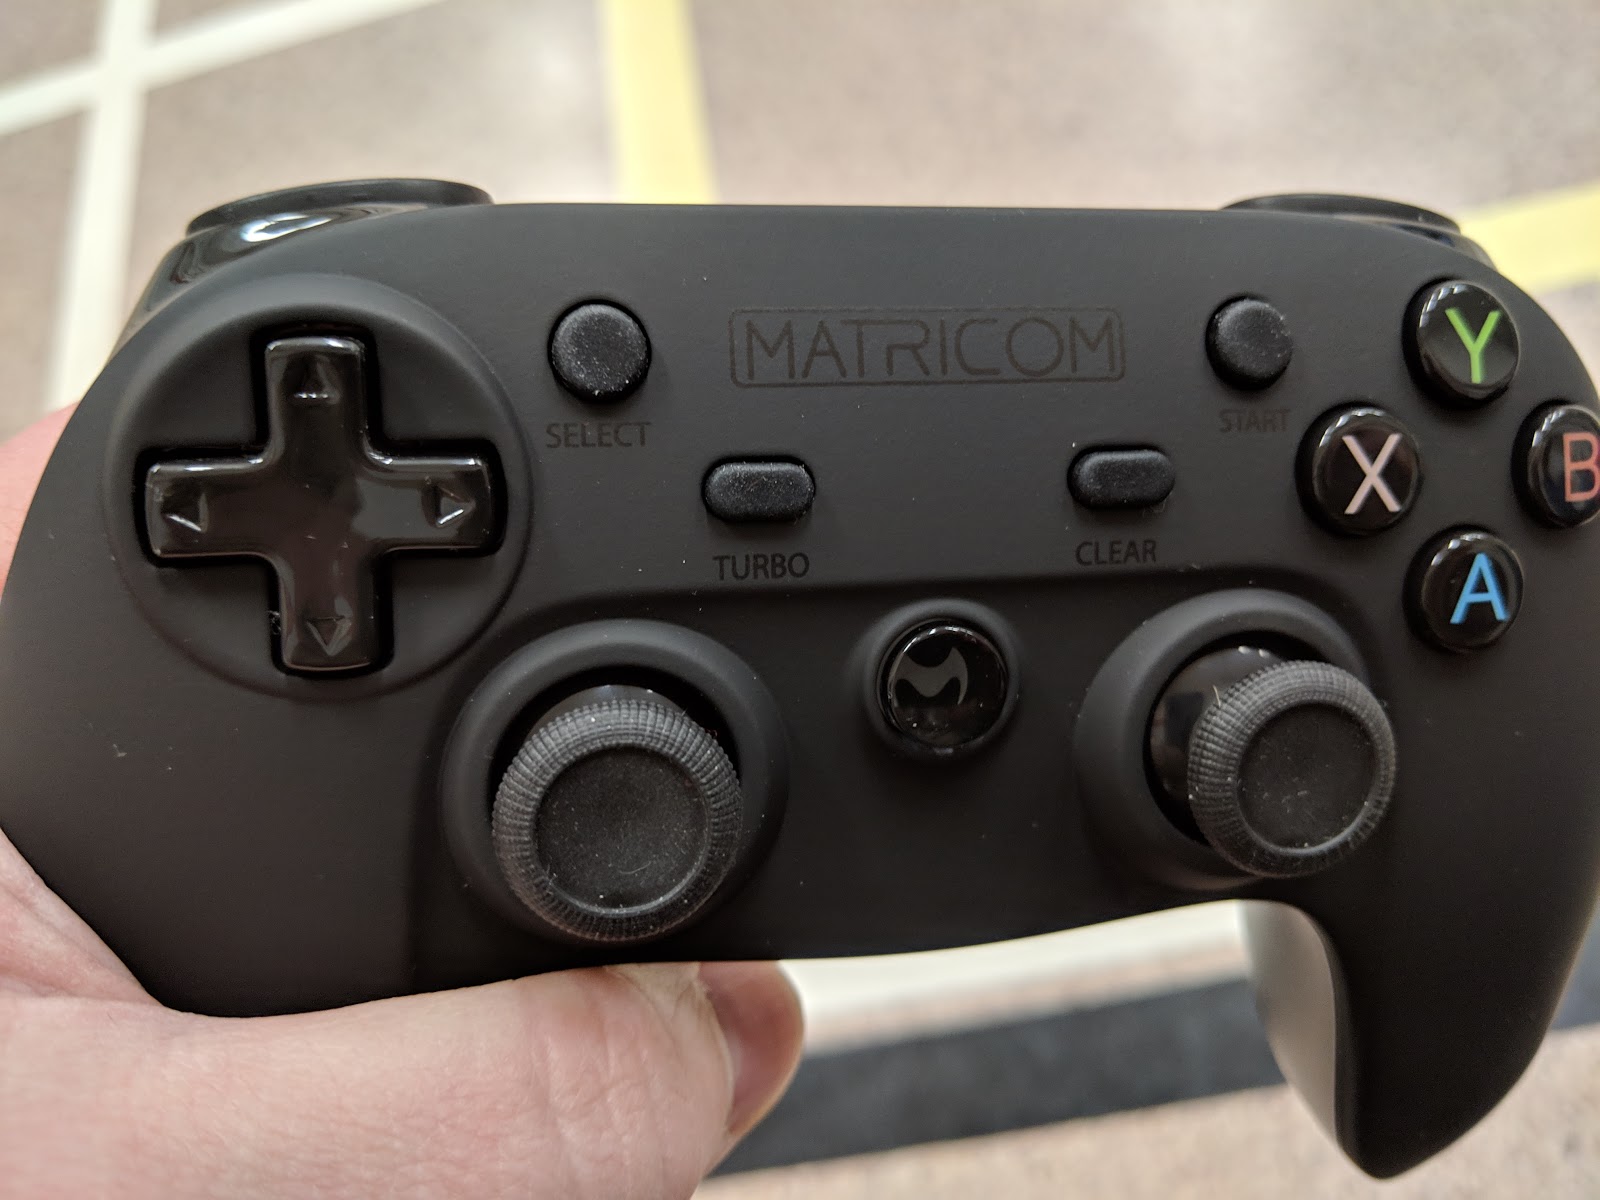 How To Pair Matricom Game Controller With Amazon TV